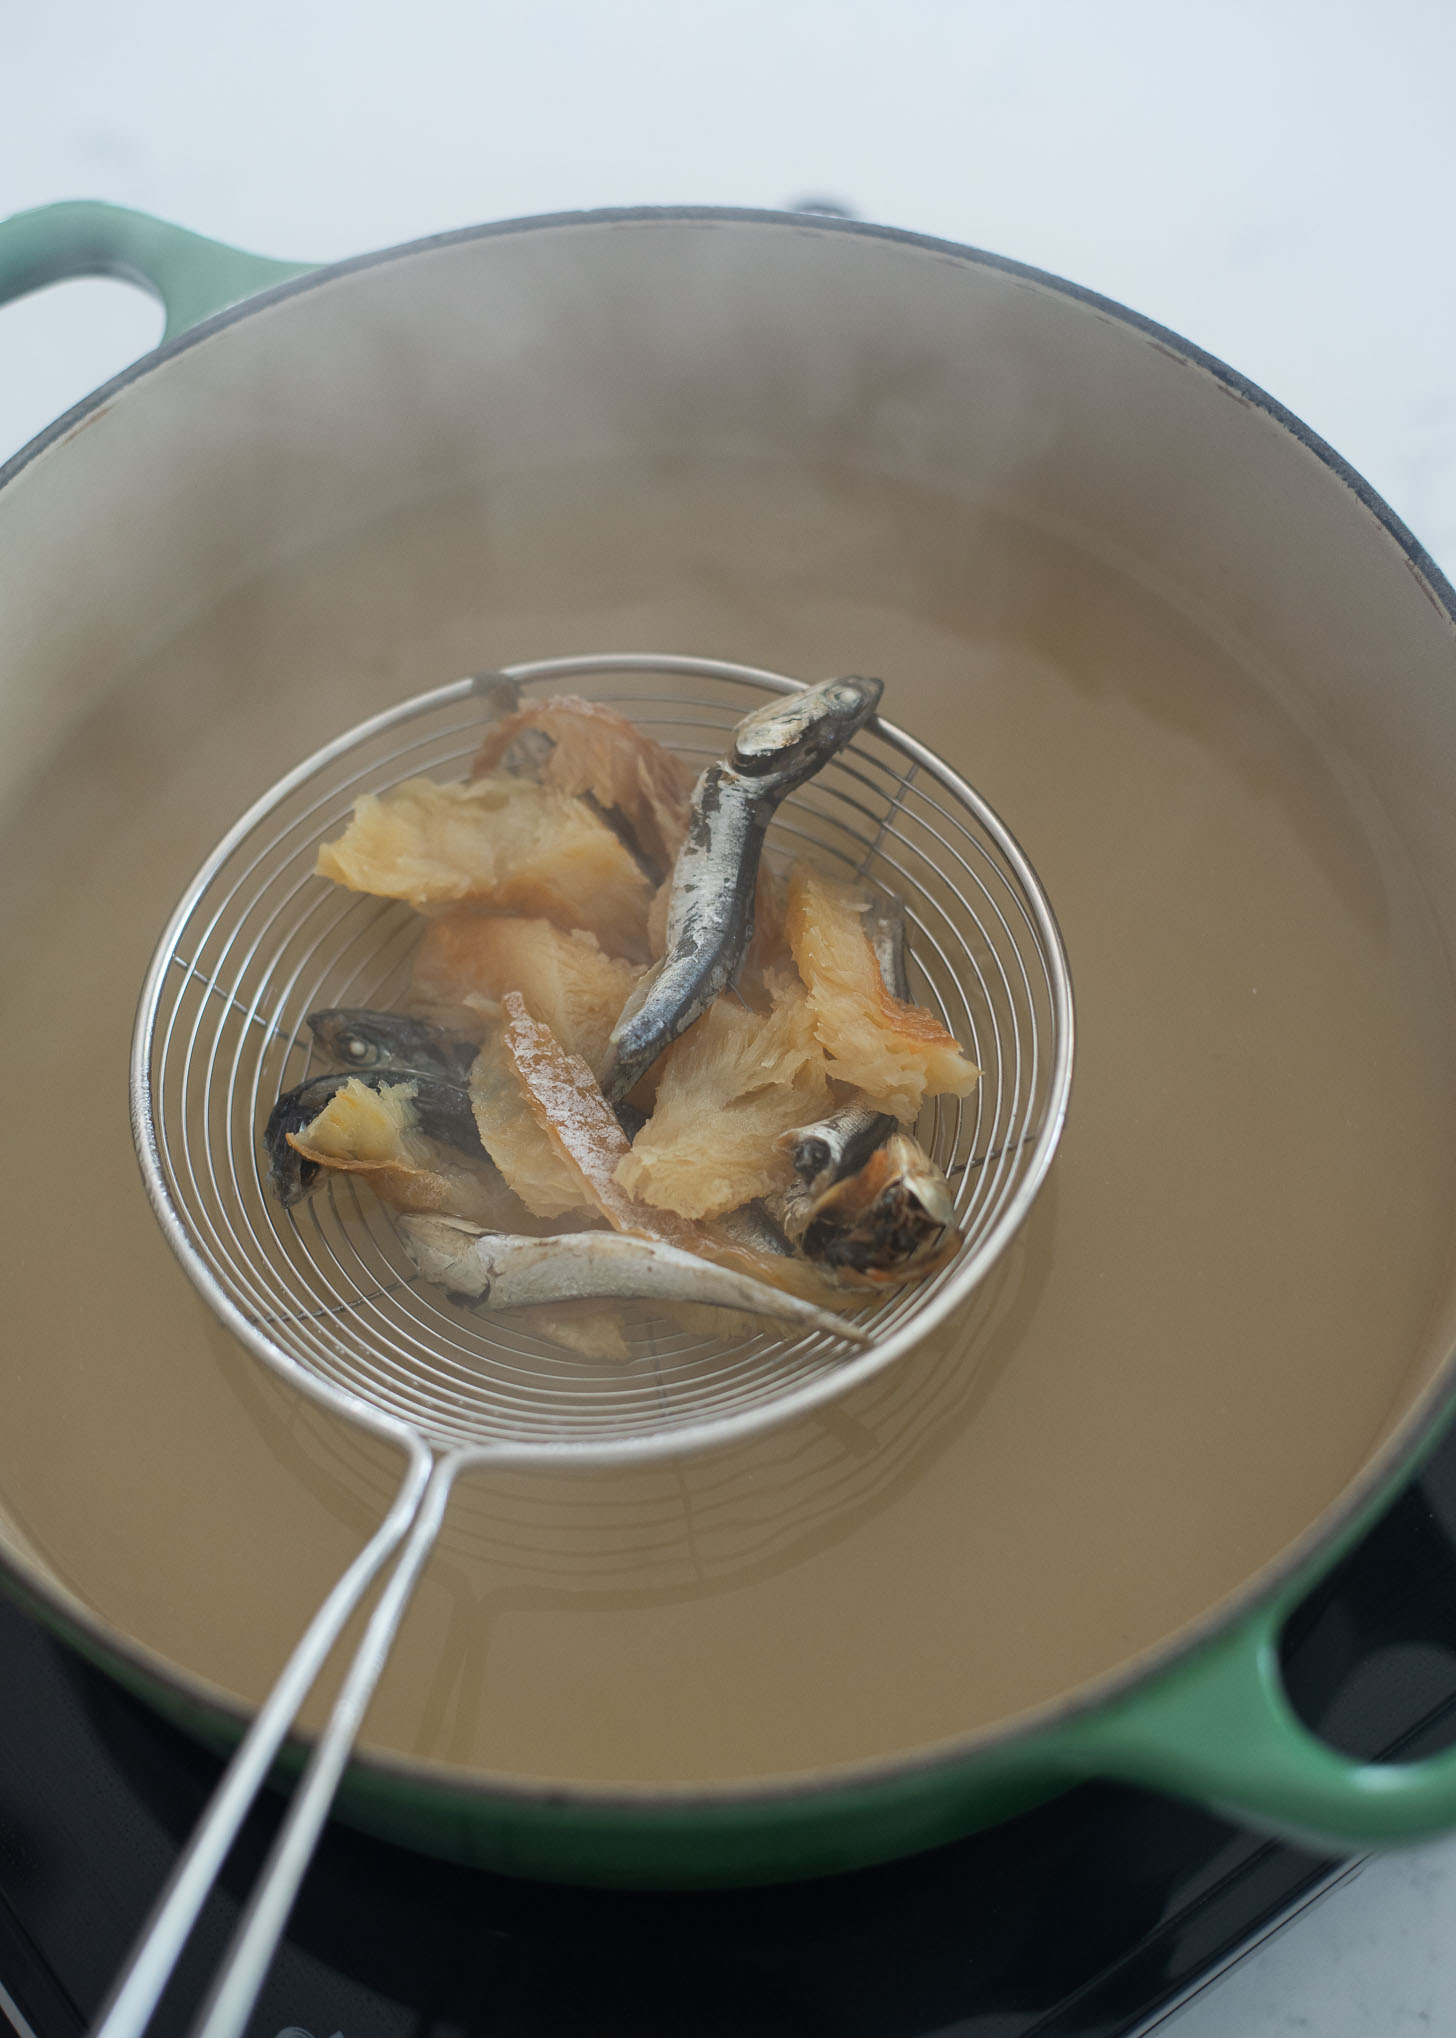 Dried fish and anchovies are used to make soup base stock.